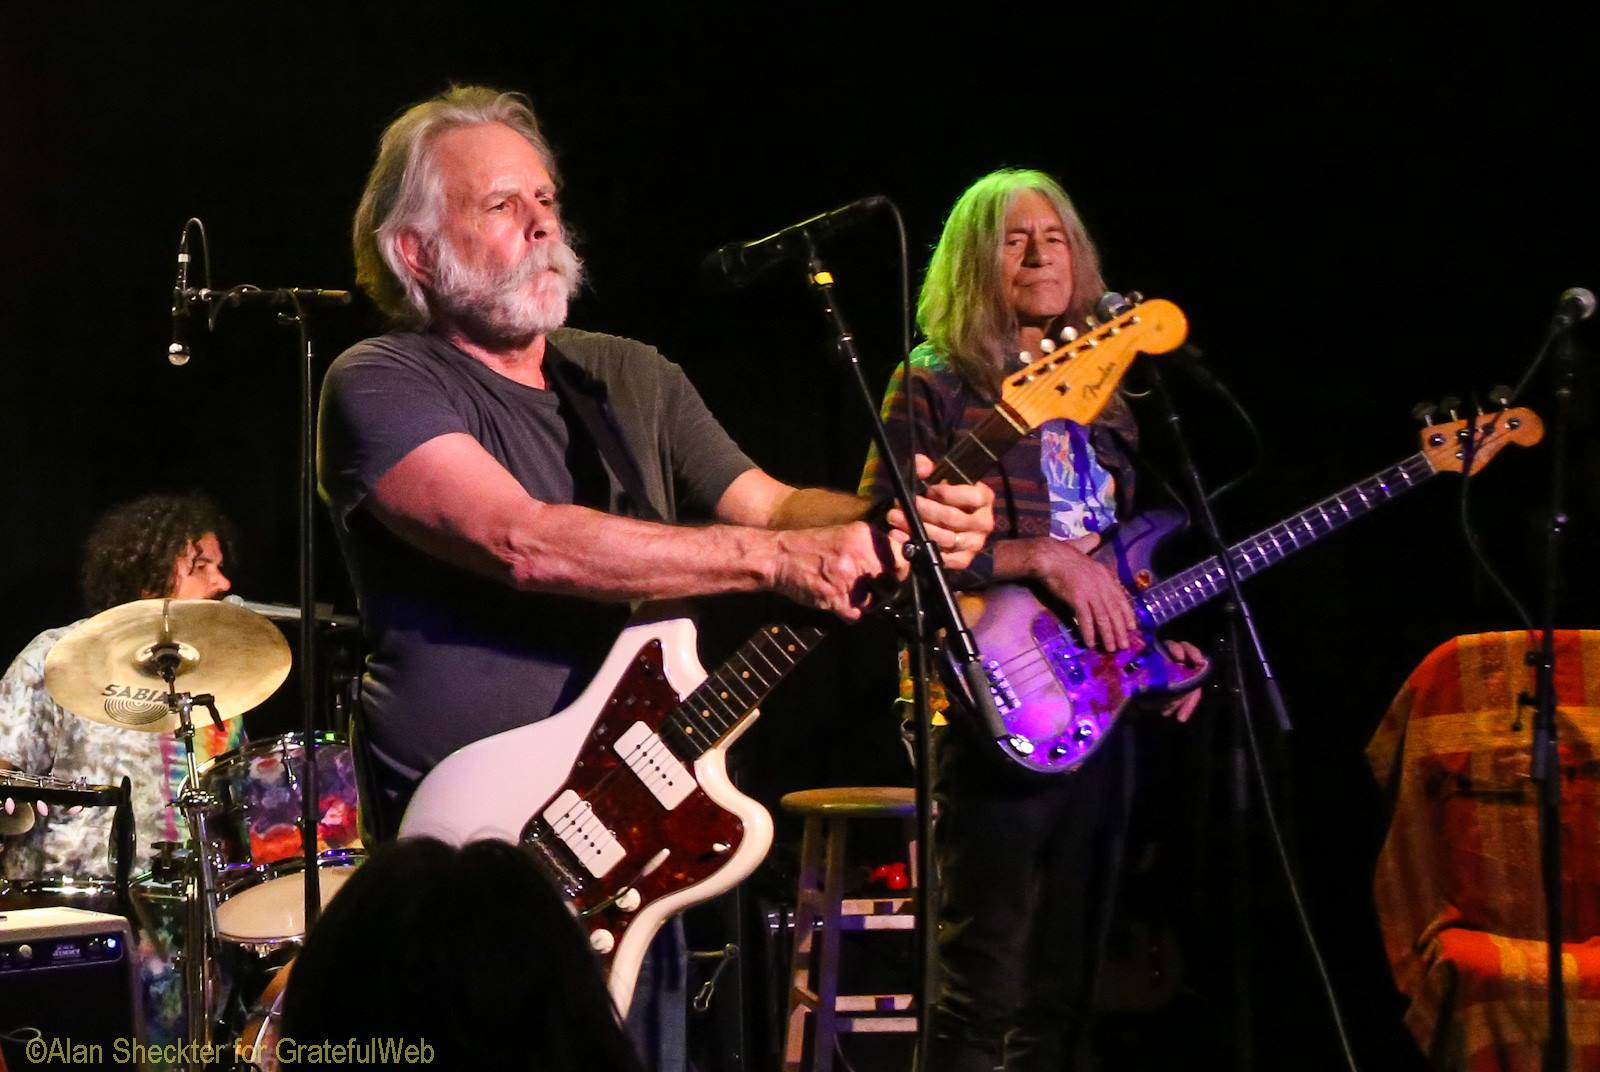 "Row Jimmy, Row" - Jay Lane, Bobby Weir, and Robin Sylvester | Sweetwater Music Hall